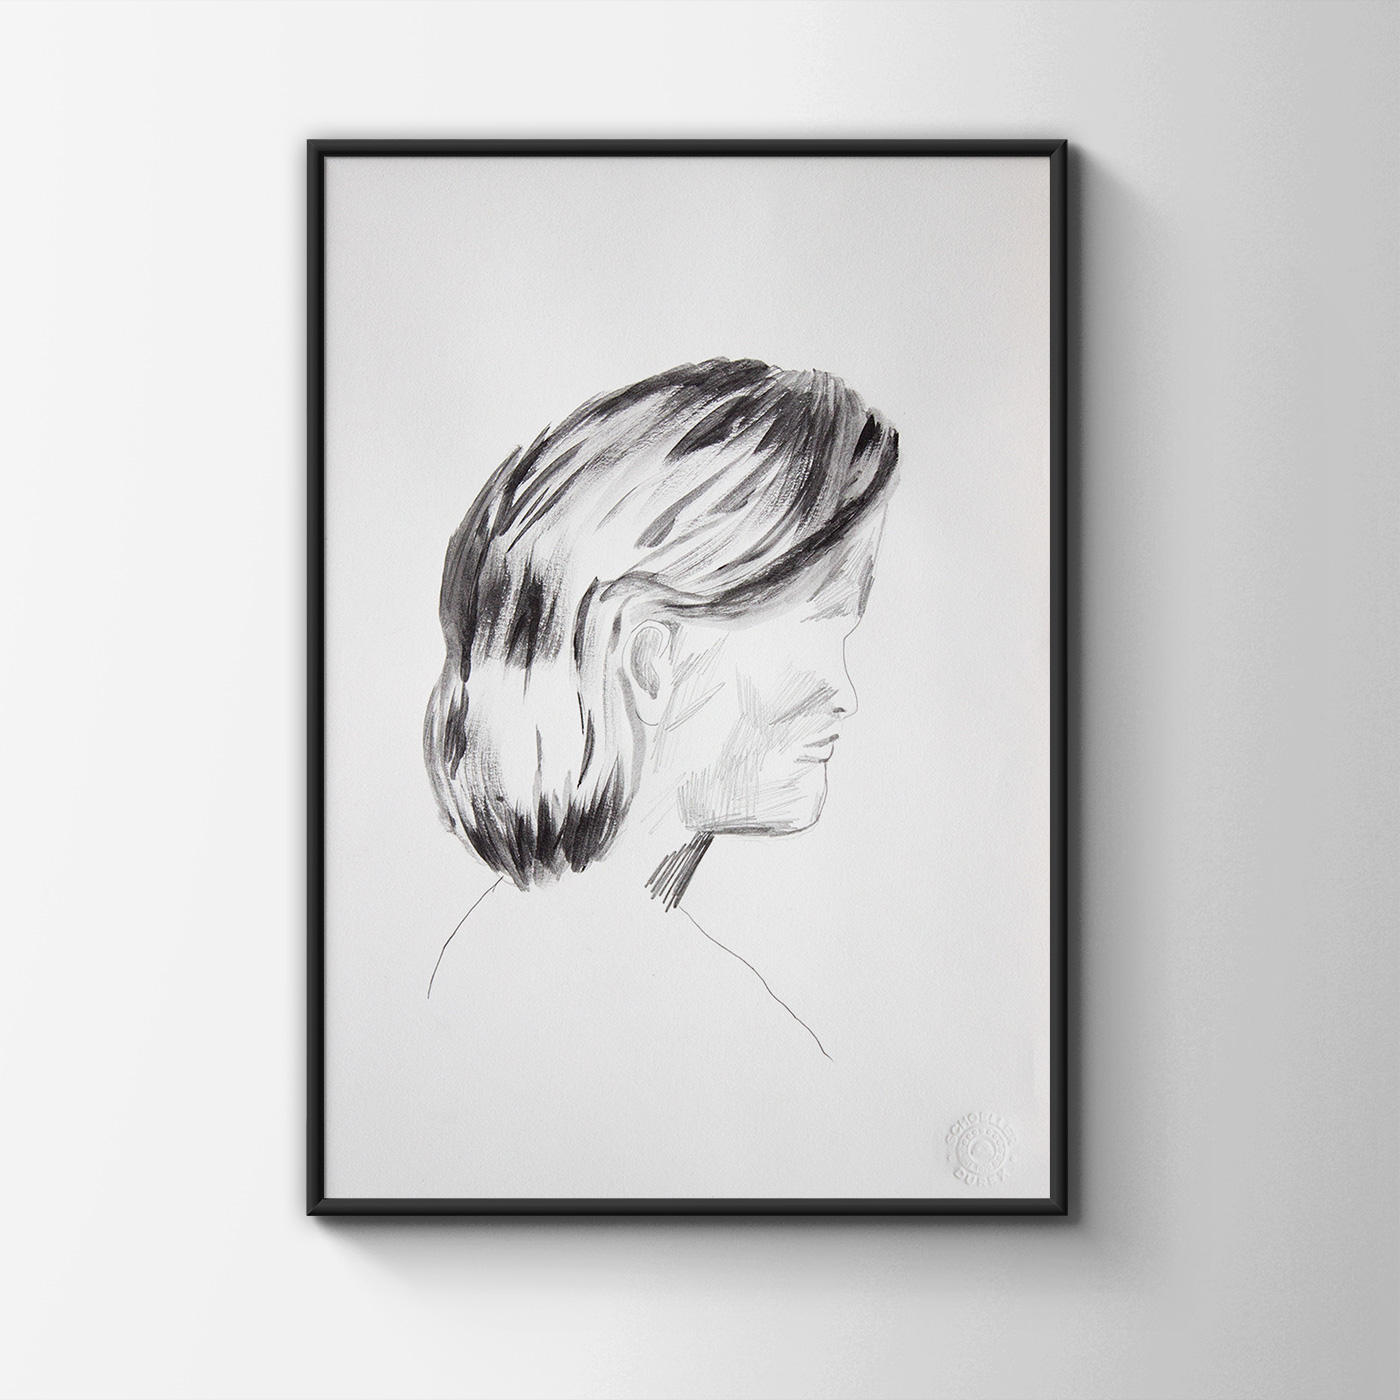 drawings, watercolors, figurative, portraiture, bodies, people, grey, white, paper, pencils, watercolor, copenhagen, danish, decorative, faces, interior, interior-design, scandinavien, Buy original high quality art. Paintings, drawings, limited edition prints & posters by talented artists.